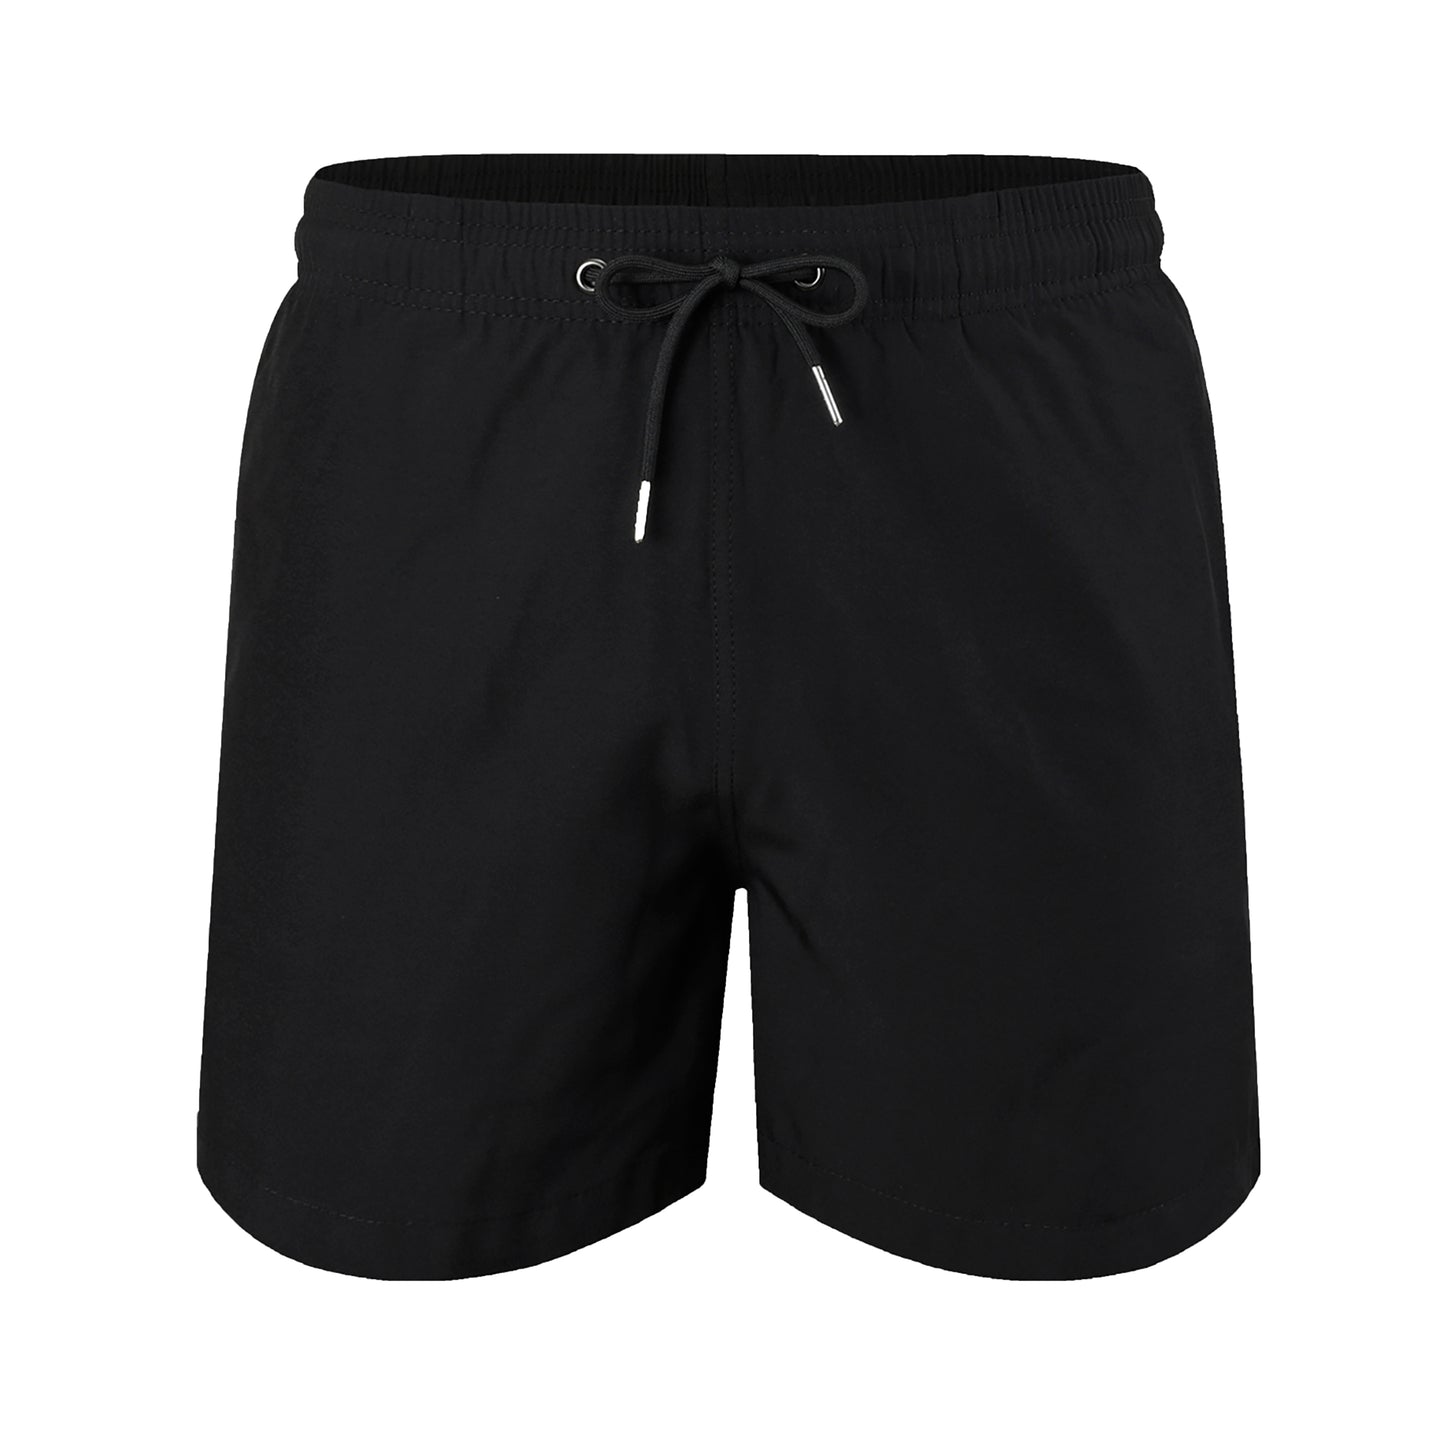 Mens Swimming Trunks with Compression Liner 5 Inch Inseam